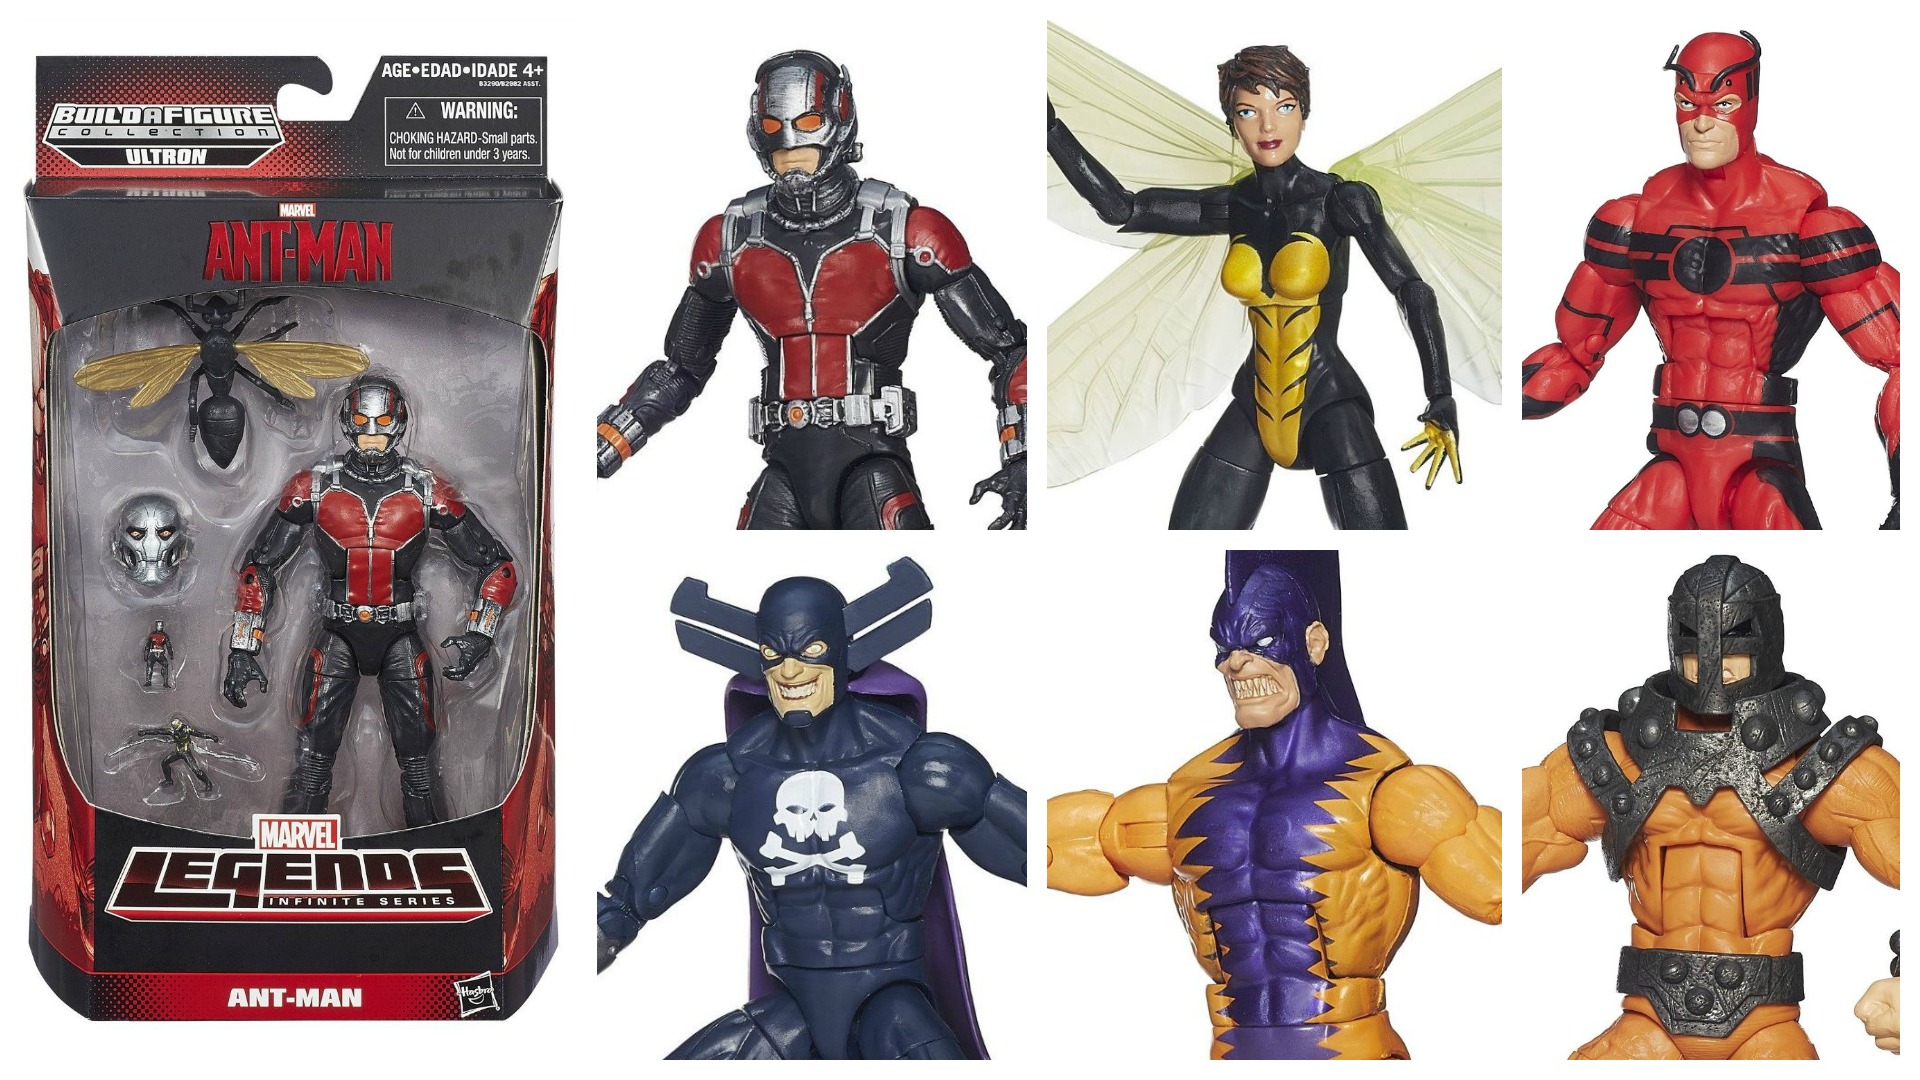 PreOrder the Marvel Legends Ultron / AntMan Wave at